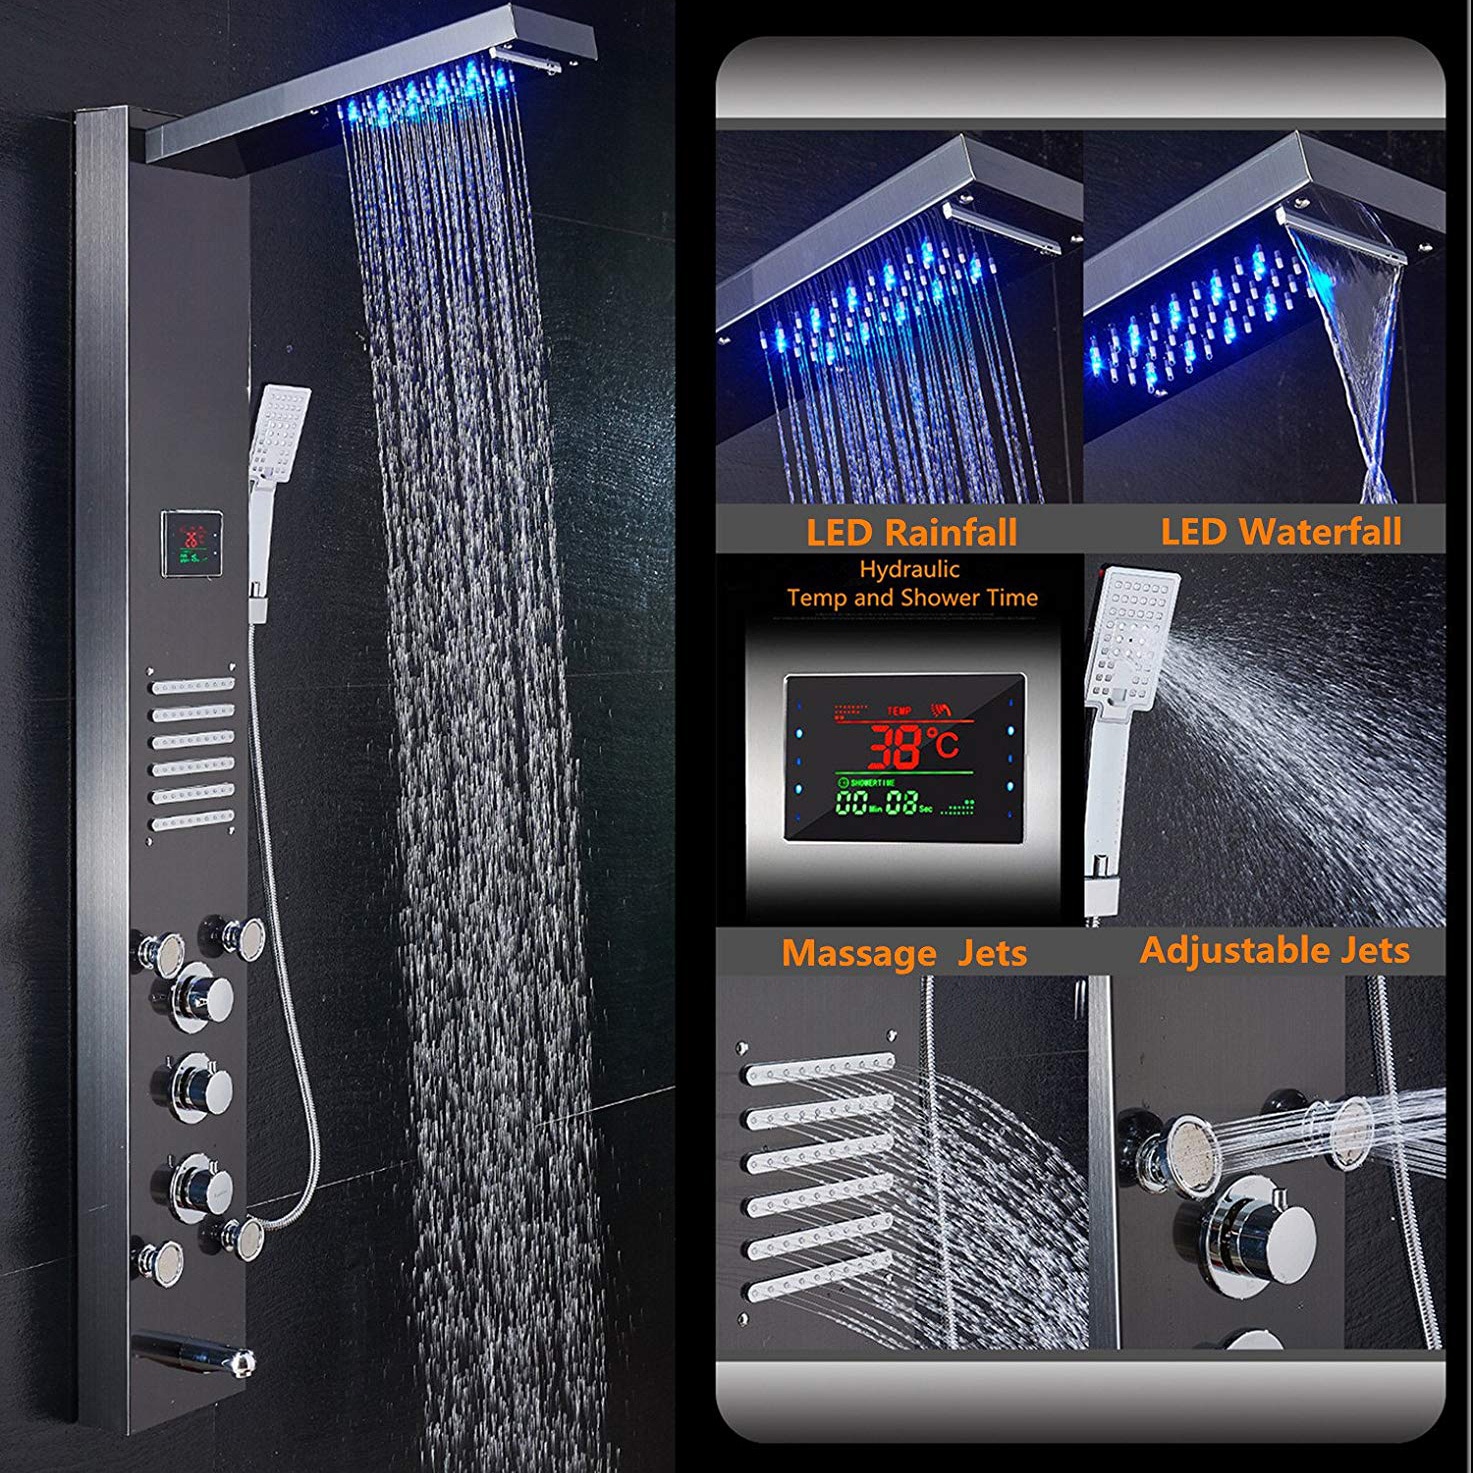 Top 10 Best LED Shower Heads in 2021 Reviews Buyer's Guide